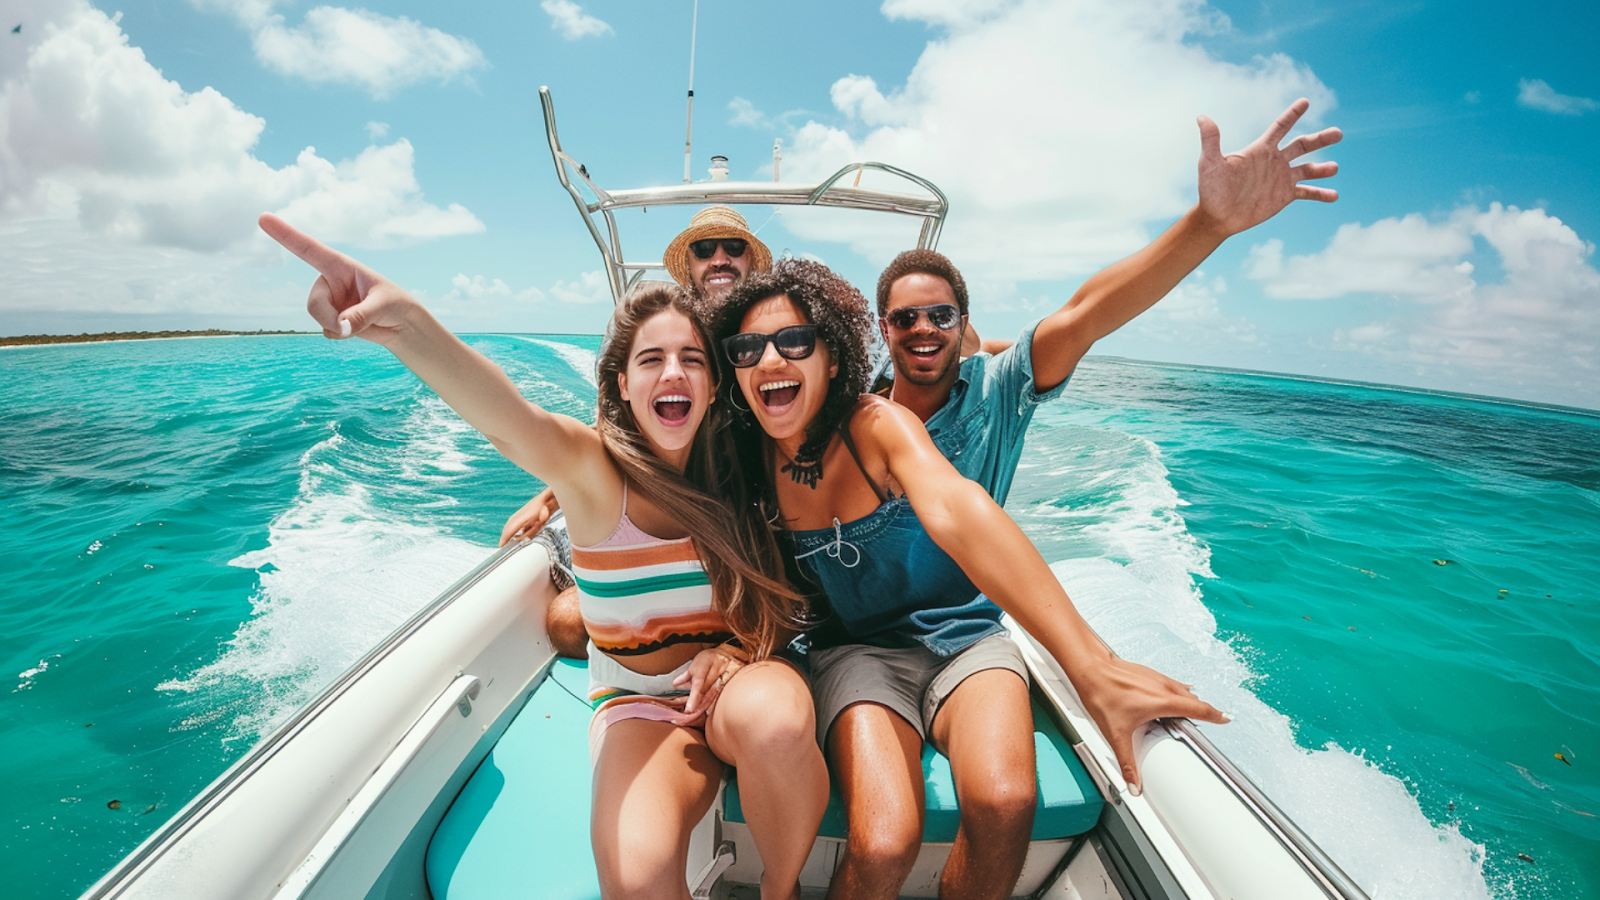 A group of friends riding a speedboat in Cancun